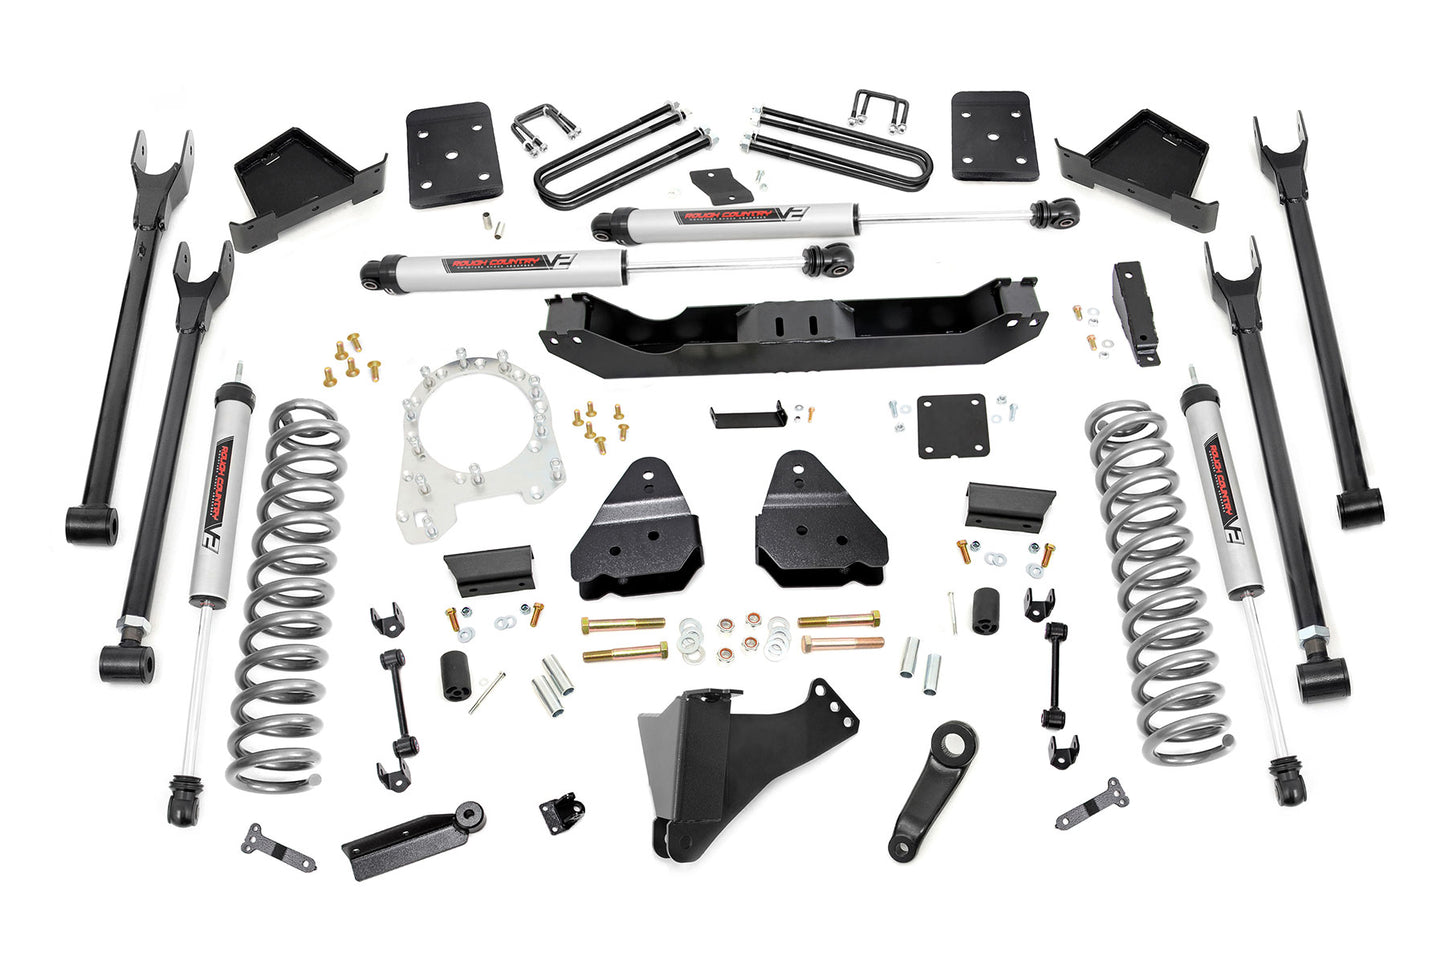 Rough Country (52670) 6 Inch Lift Kit | 4-Link | No OVLD | V2 | Ford F-250/F-350 Super Duty (17-22)